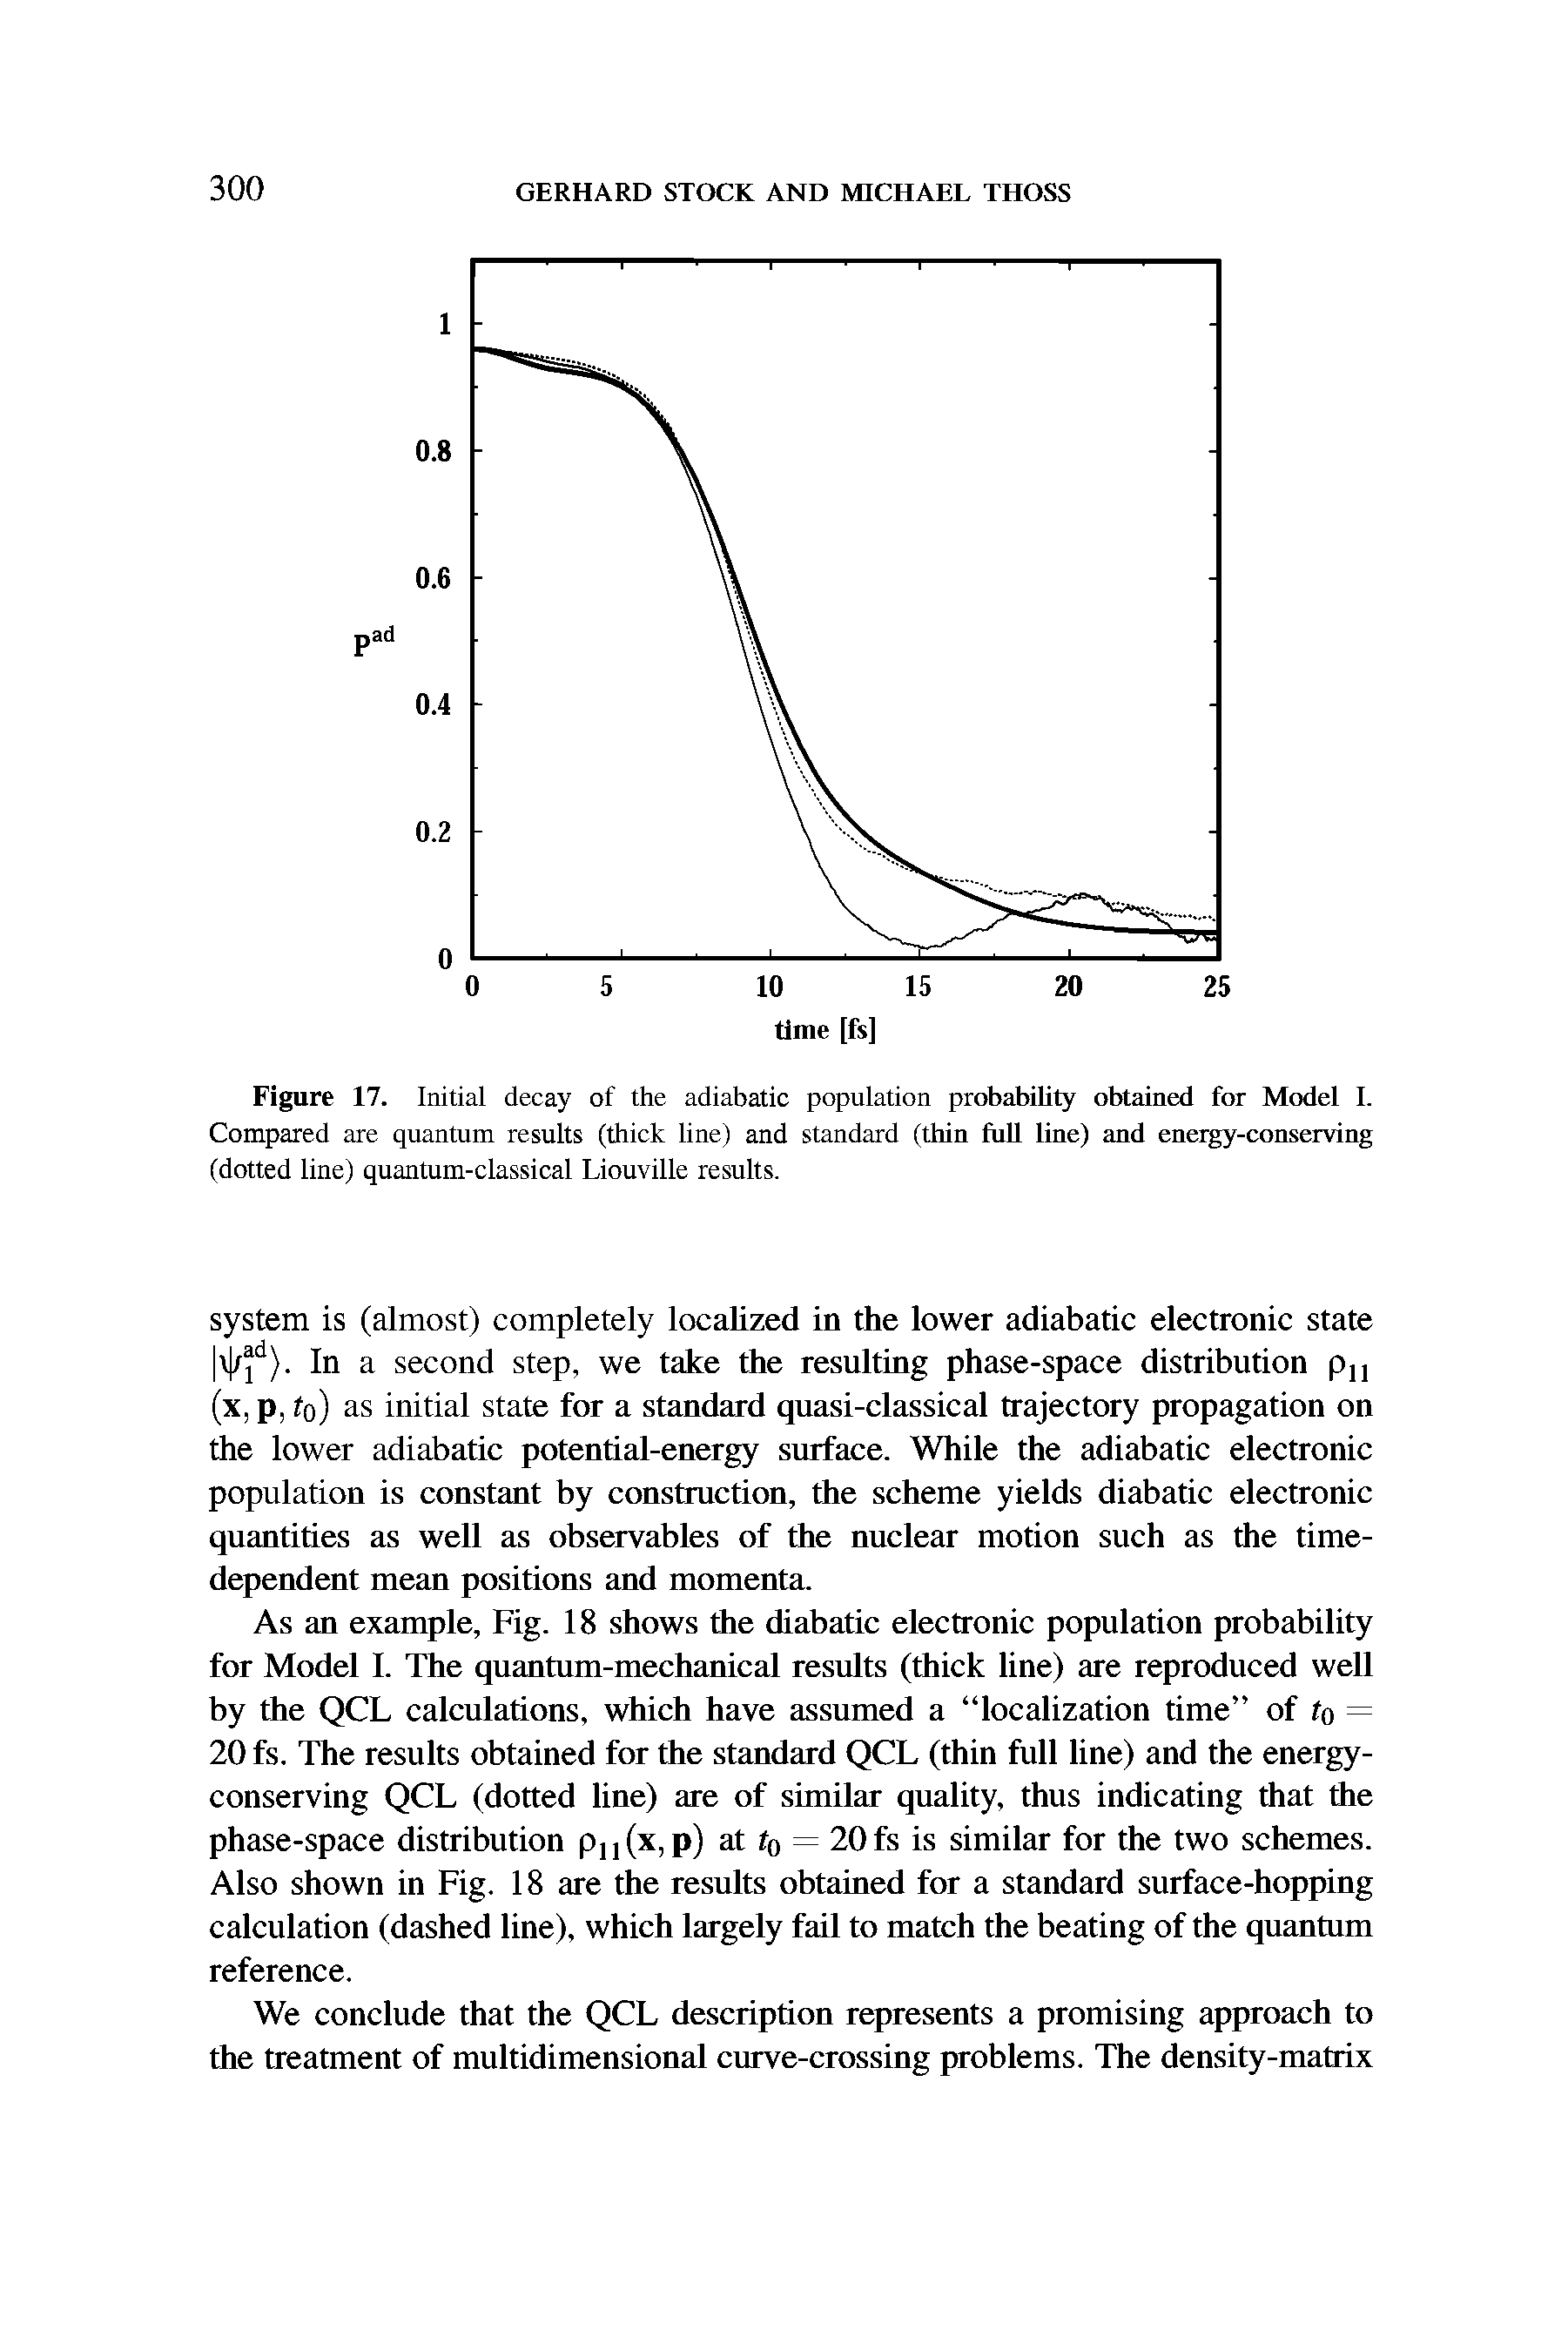 Figure 17. Initial decay of the adiabatic population probability obtained for Model I. Compared are quantum results (thick line) and standard (thin full line) and energy-conserving (dotted line) quantum-classical Liouville results.